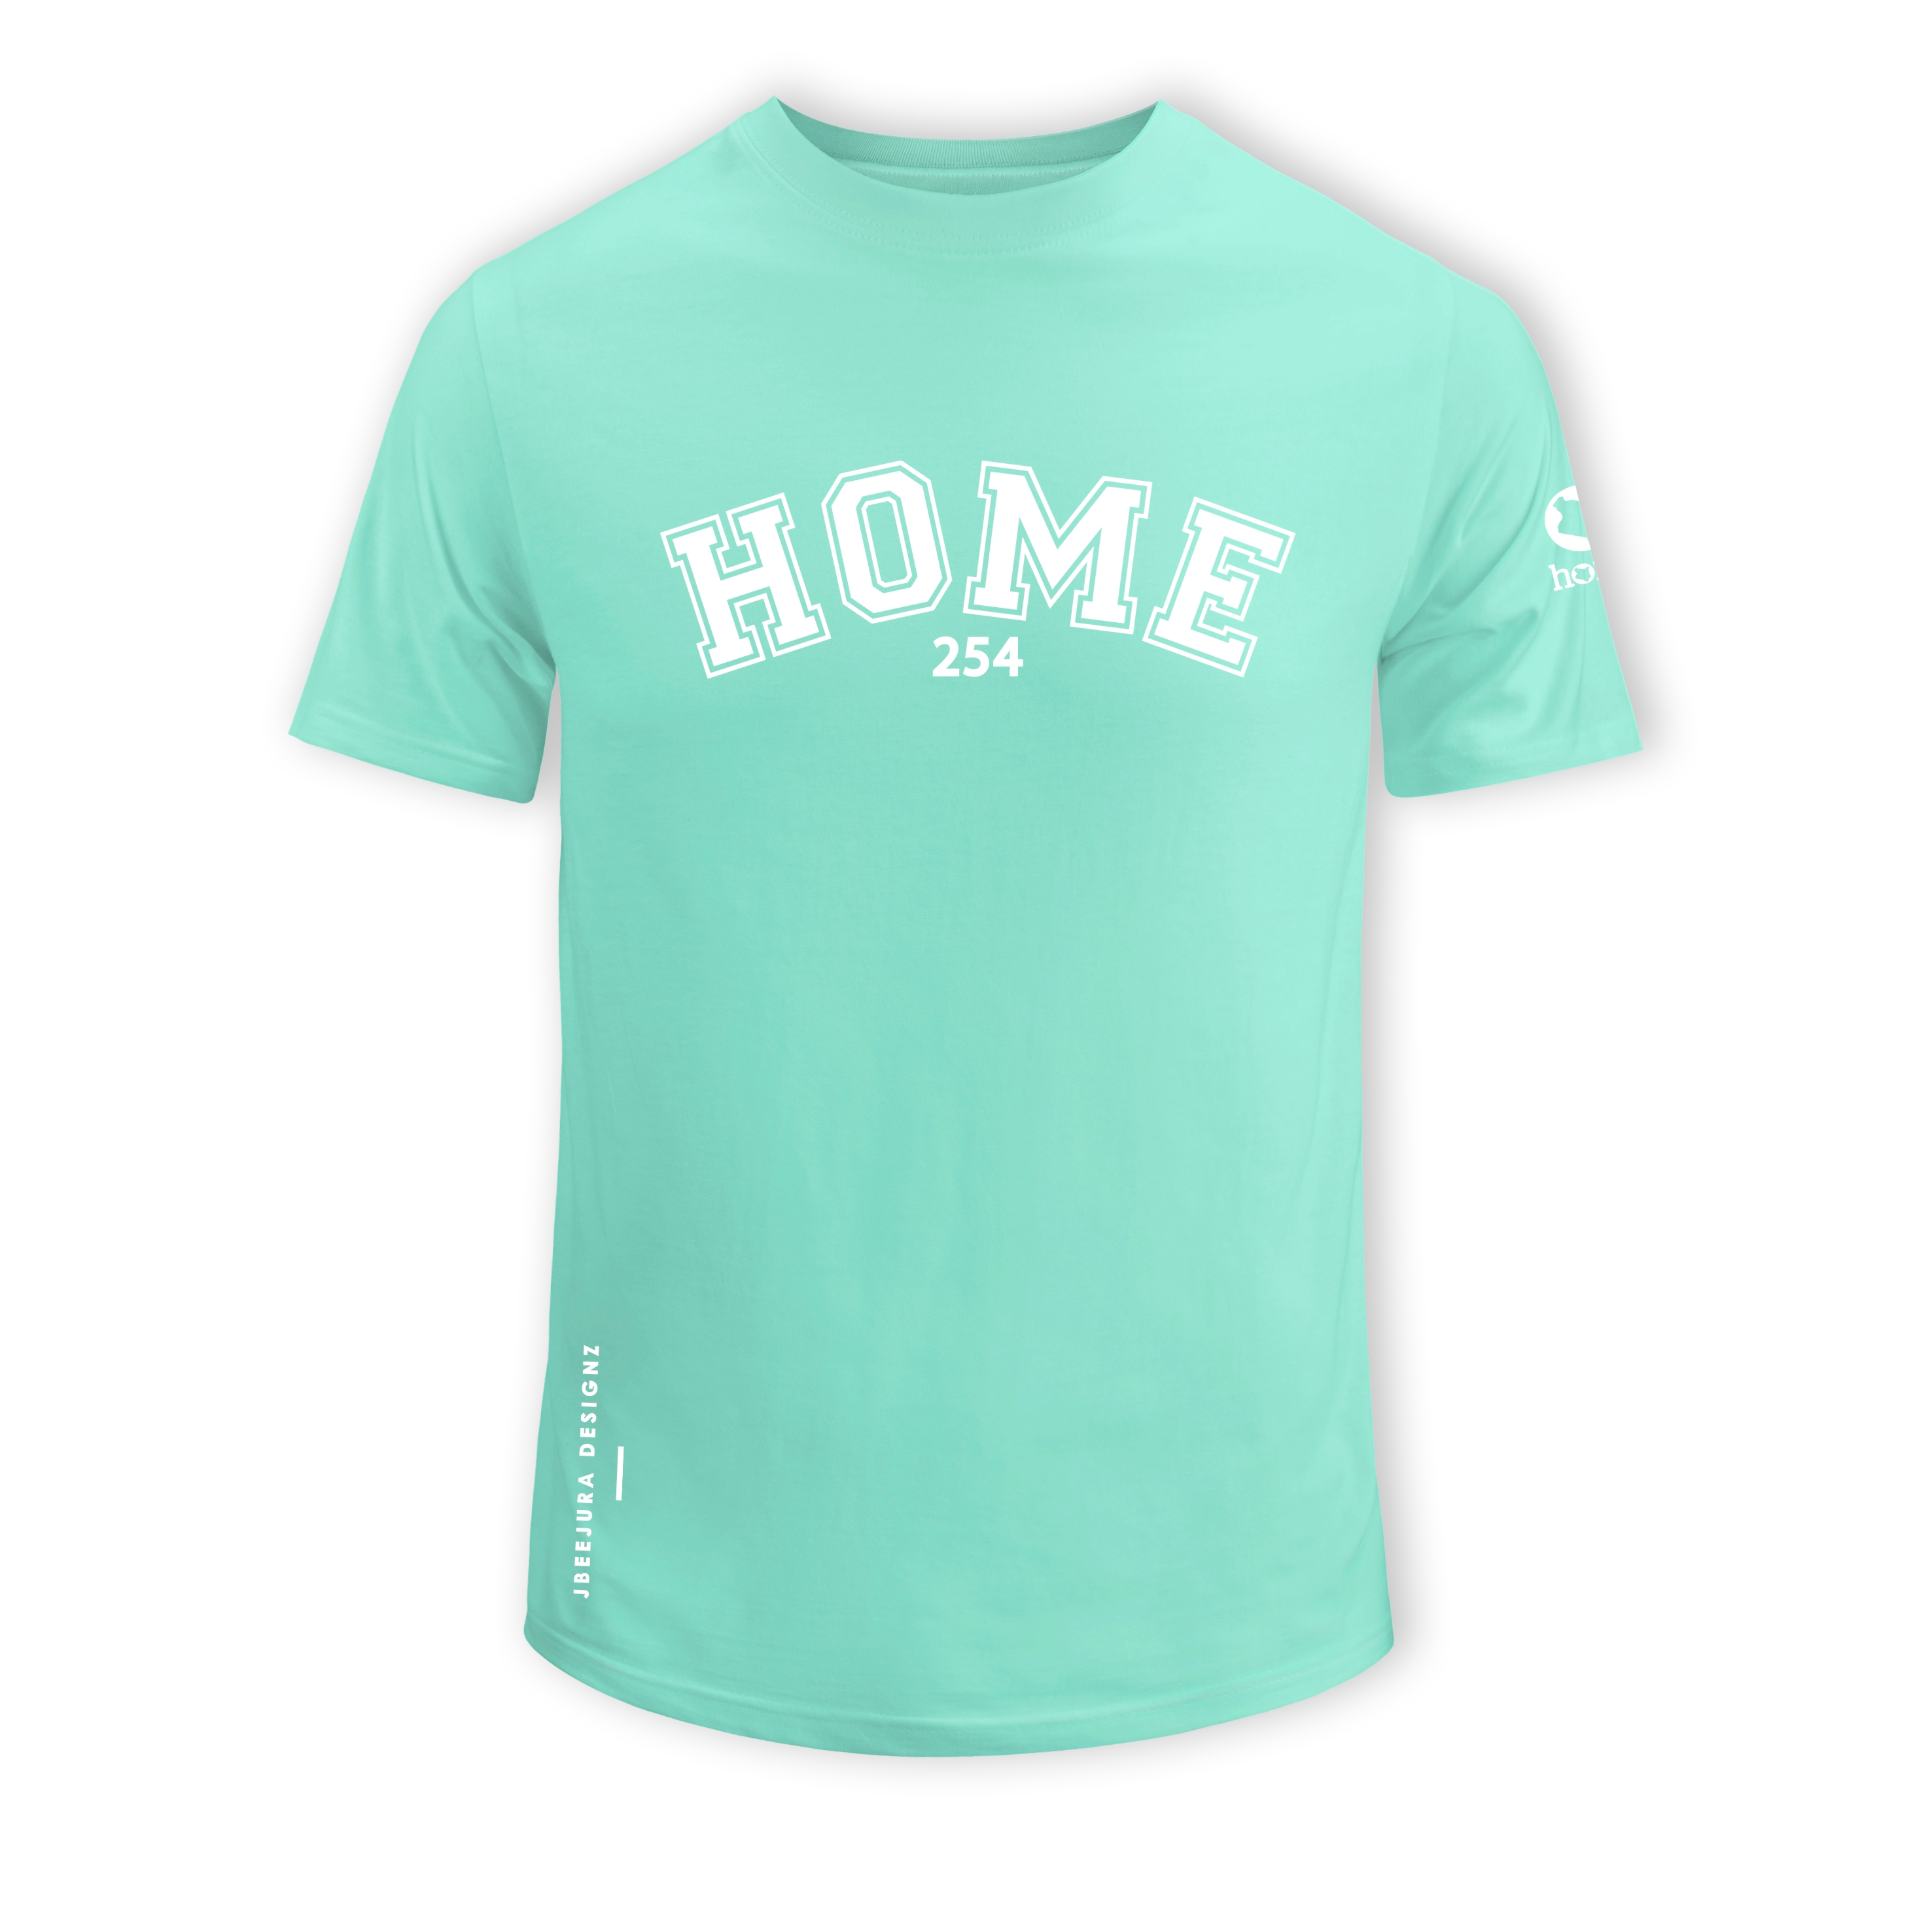 home_254 SHORT-SLEEVED TURQUOISE GREEN T-SHIRT WITH A WHITE COLLEGE PRINT – COTTON PLUS FABRIC